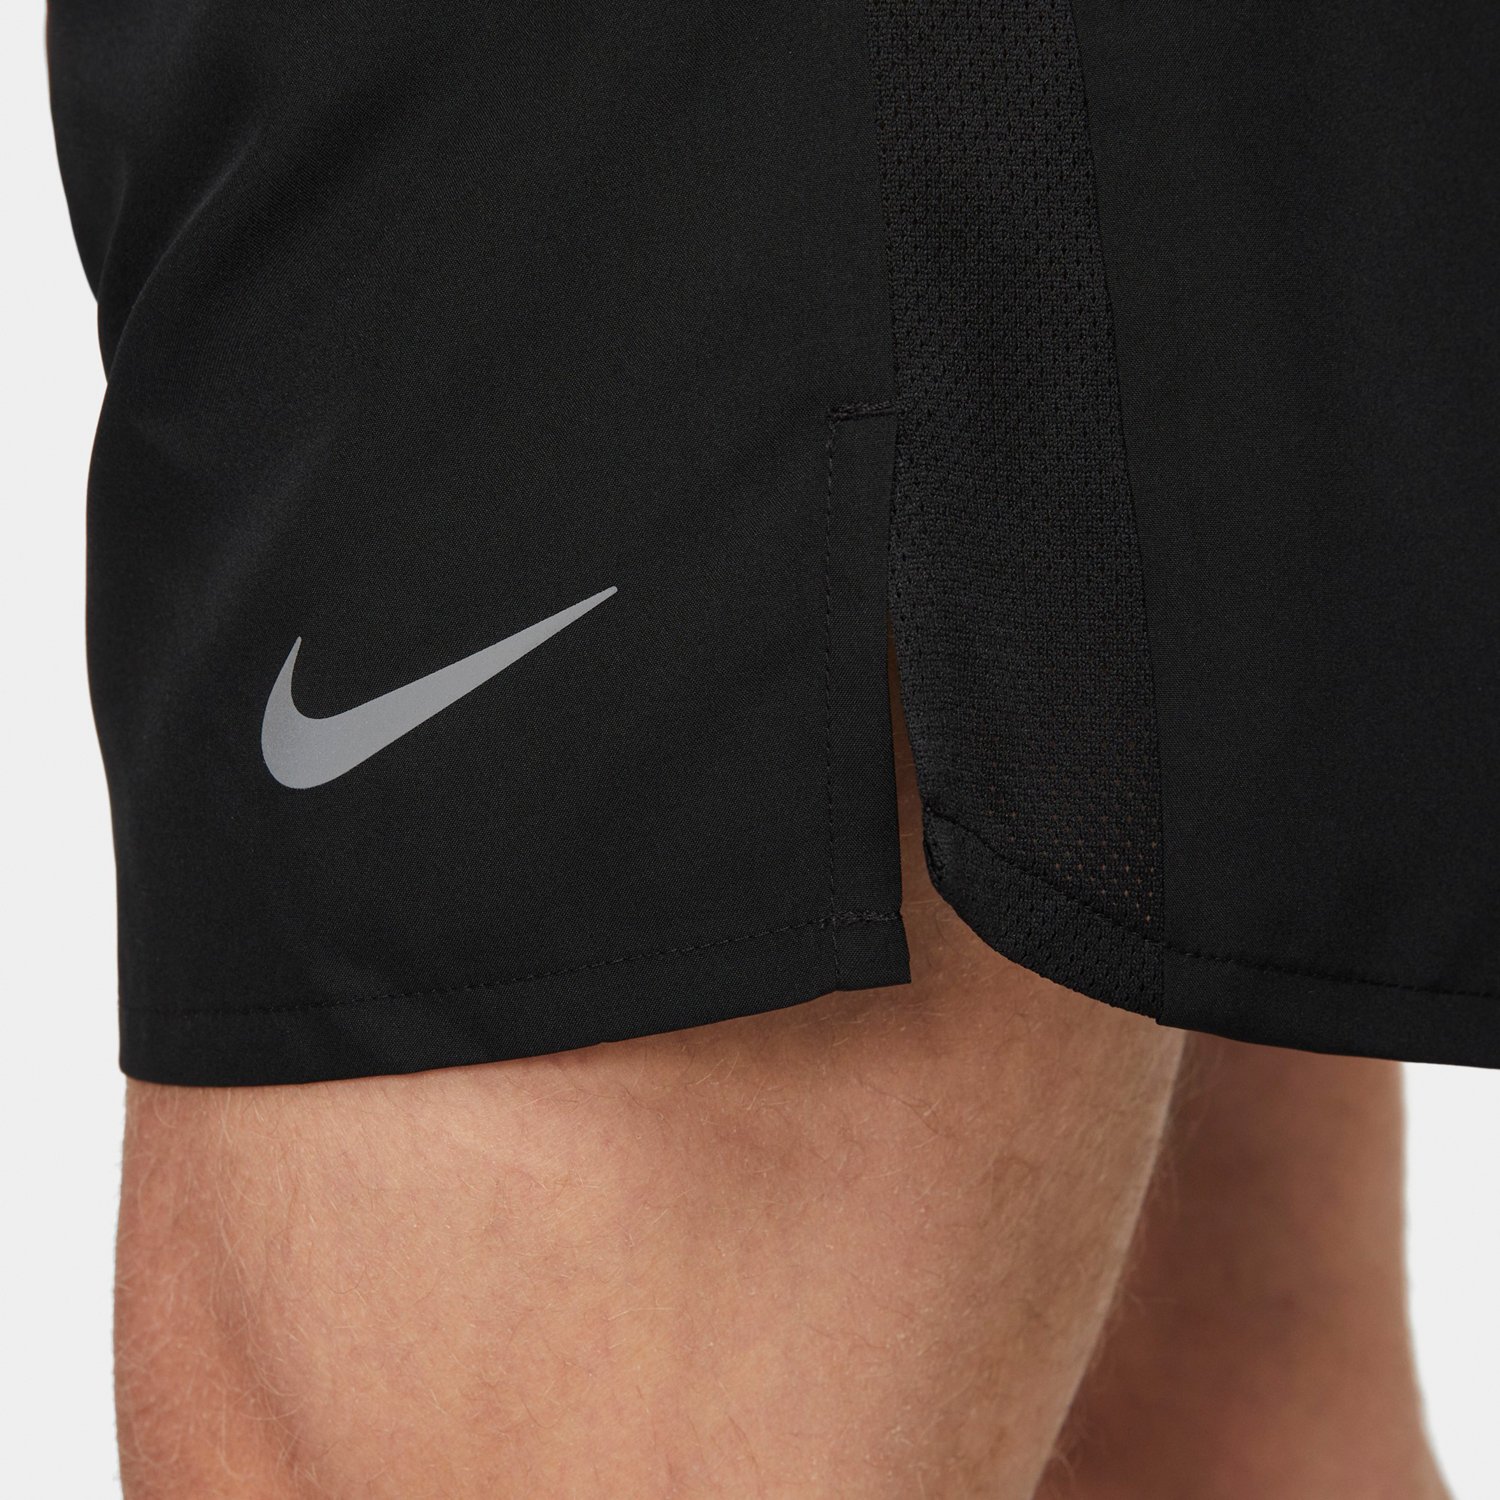 Nike Challenger Men's Dri-FIT 7 Brief-Lined Running Shorts.